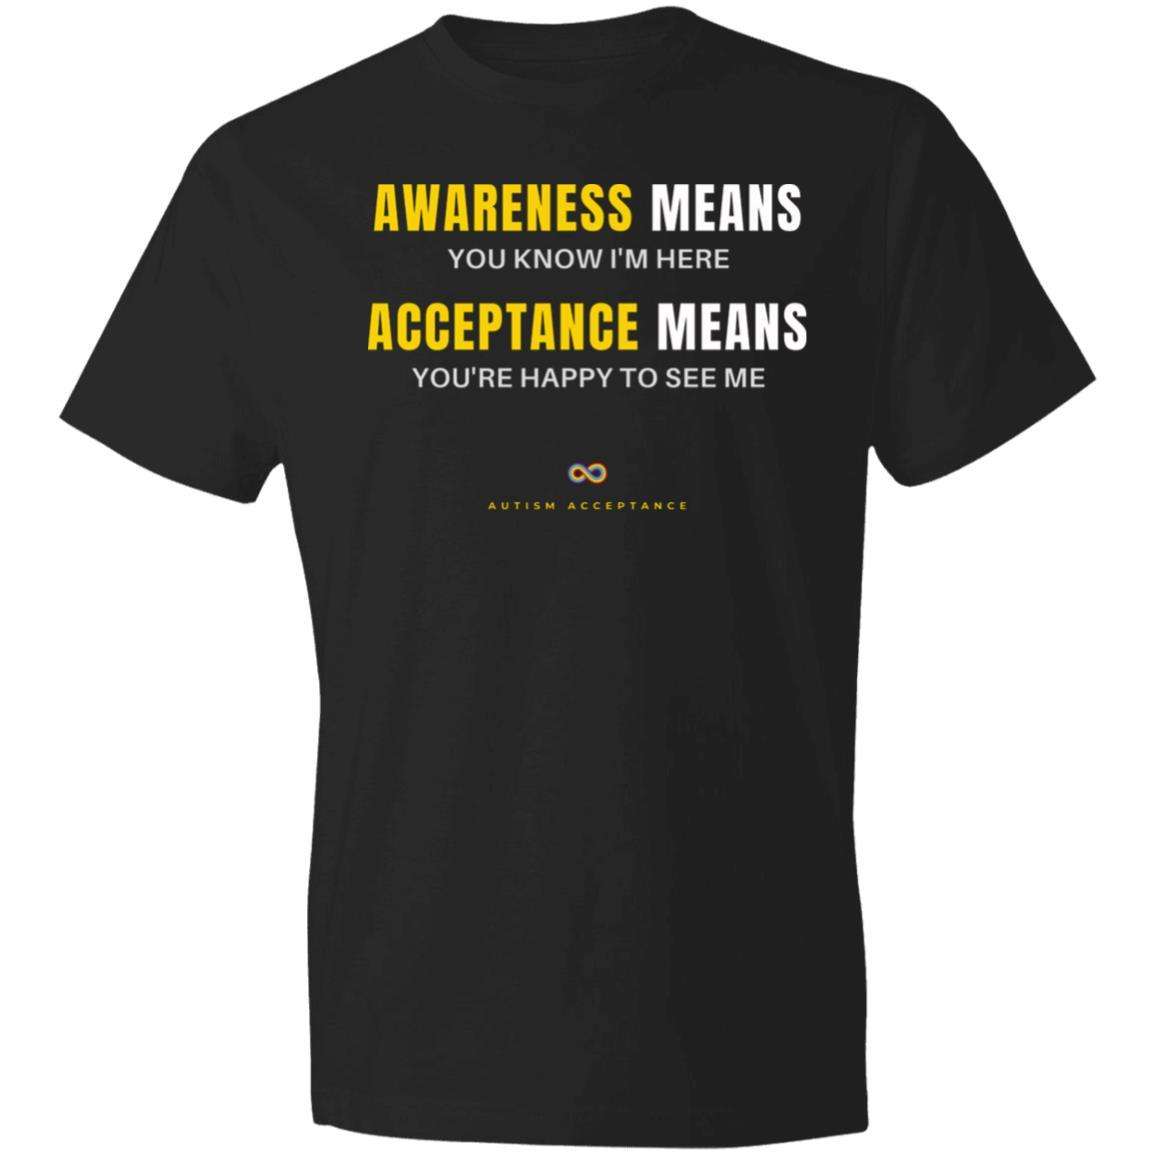 Awareness means you know I'm here acceptance means you're happy to see me - Autism awareness, autism acceptance